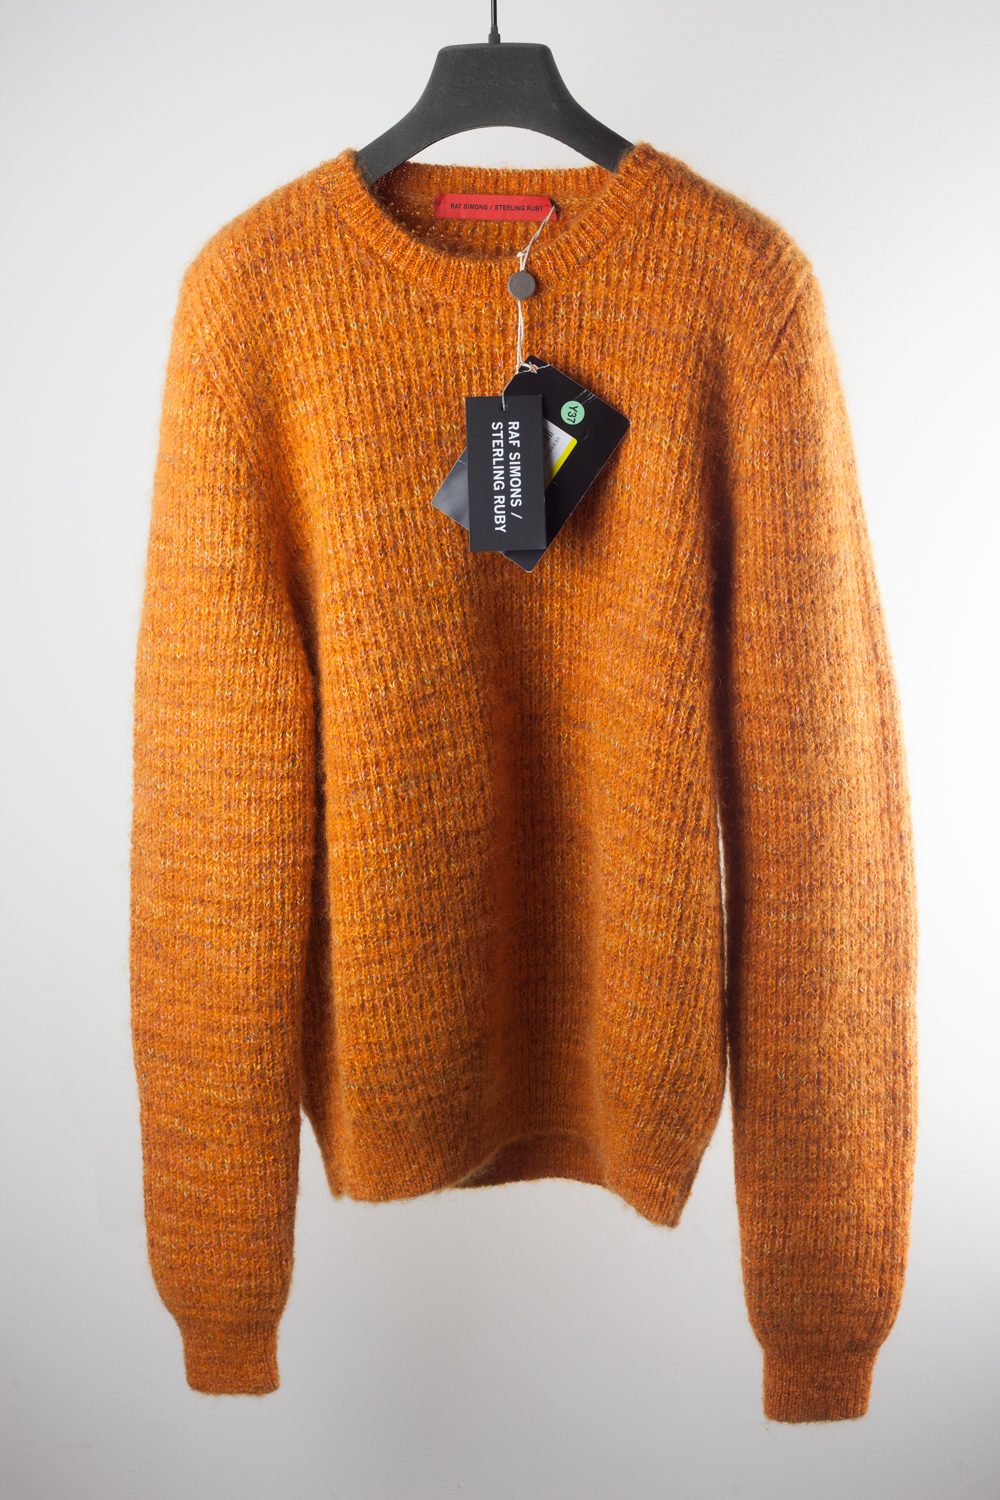 NWT Raf Simons x Sterling Ruby Knit Sweater